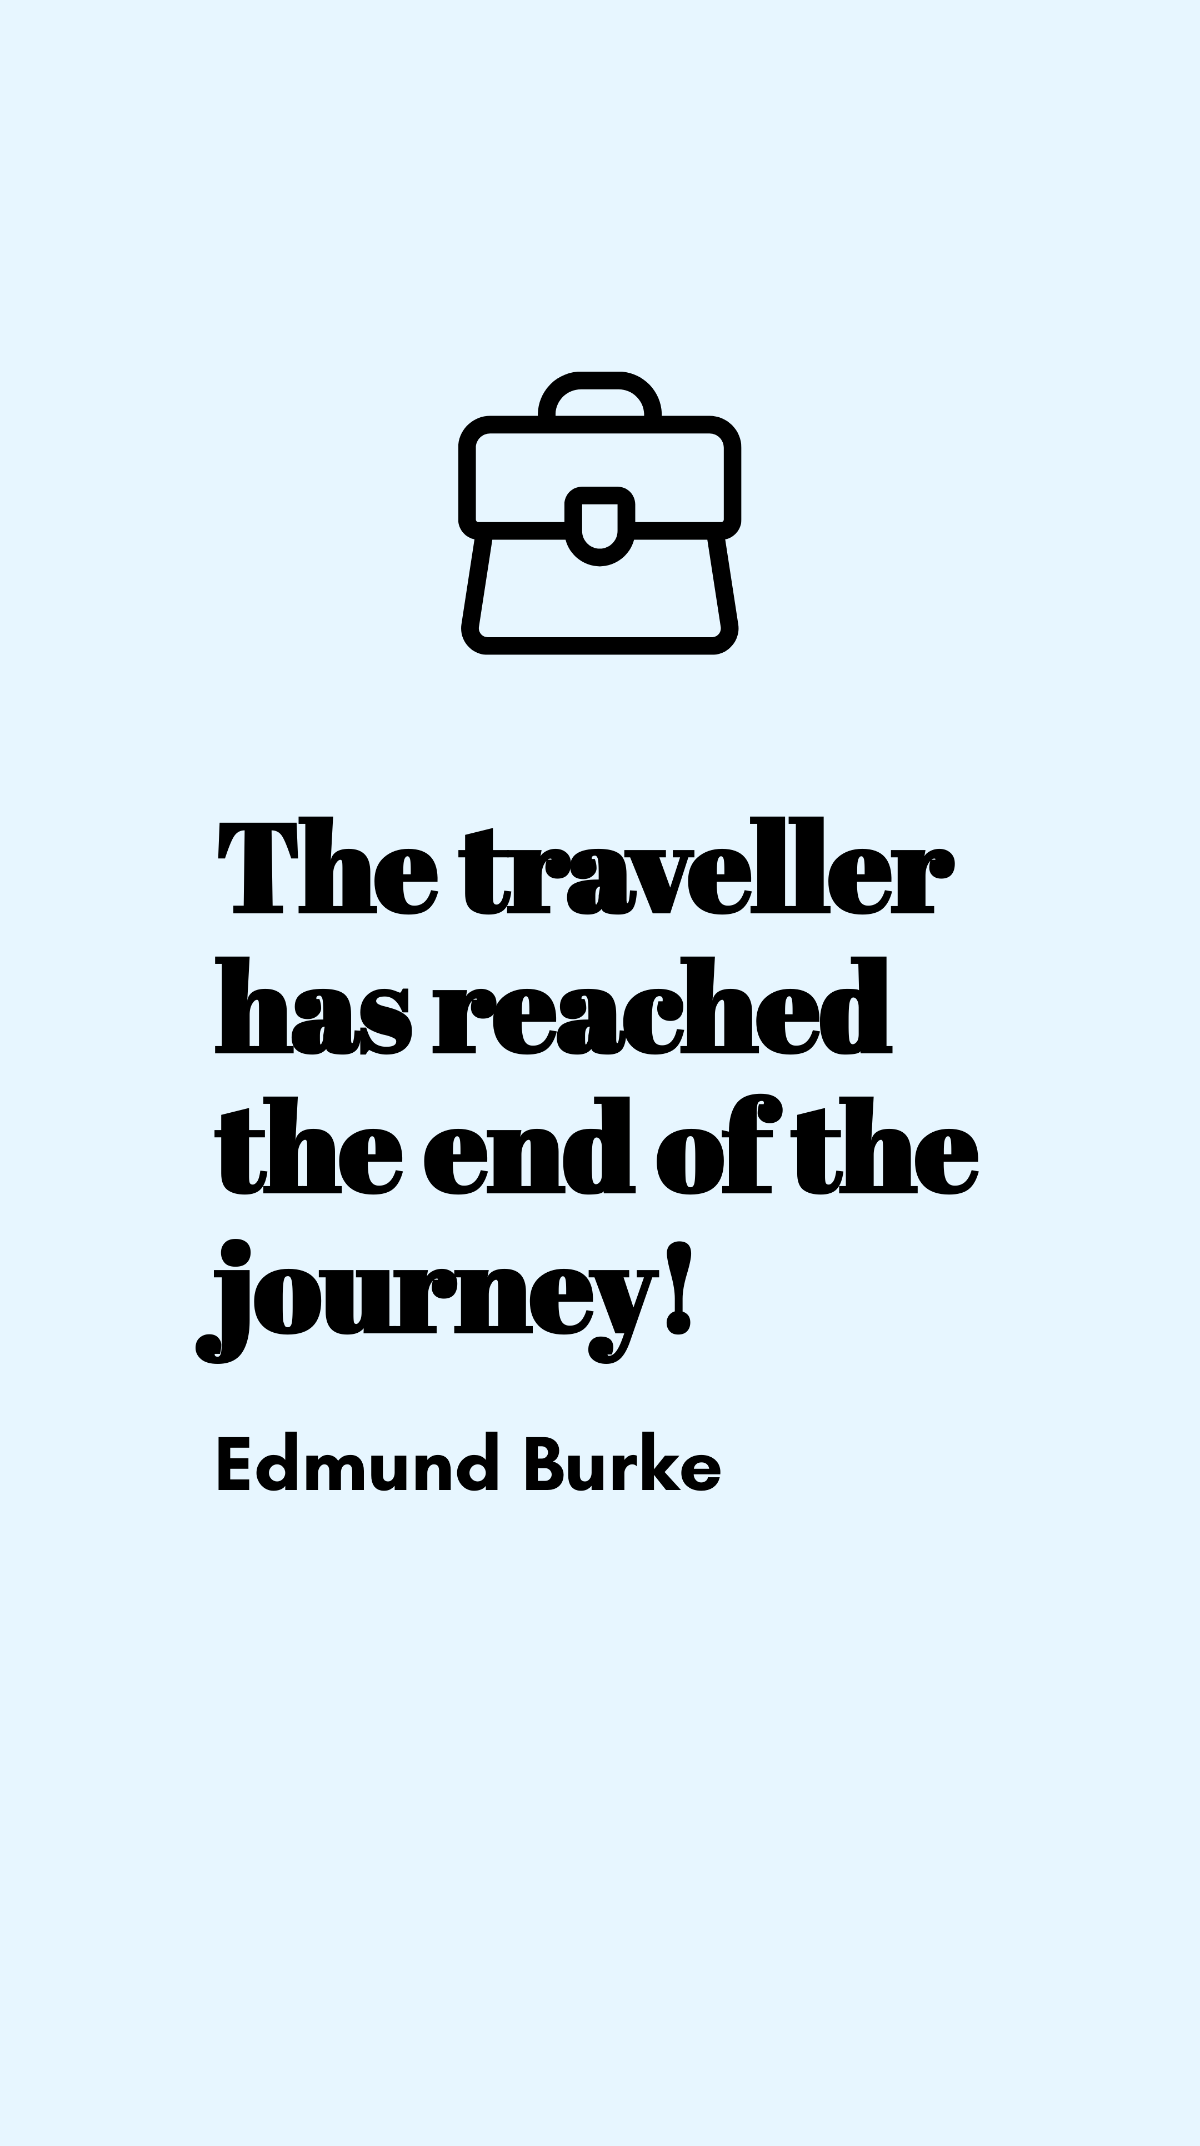 Edmund Burke - The traveller has reached the end of the journey!